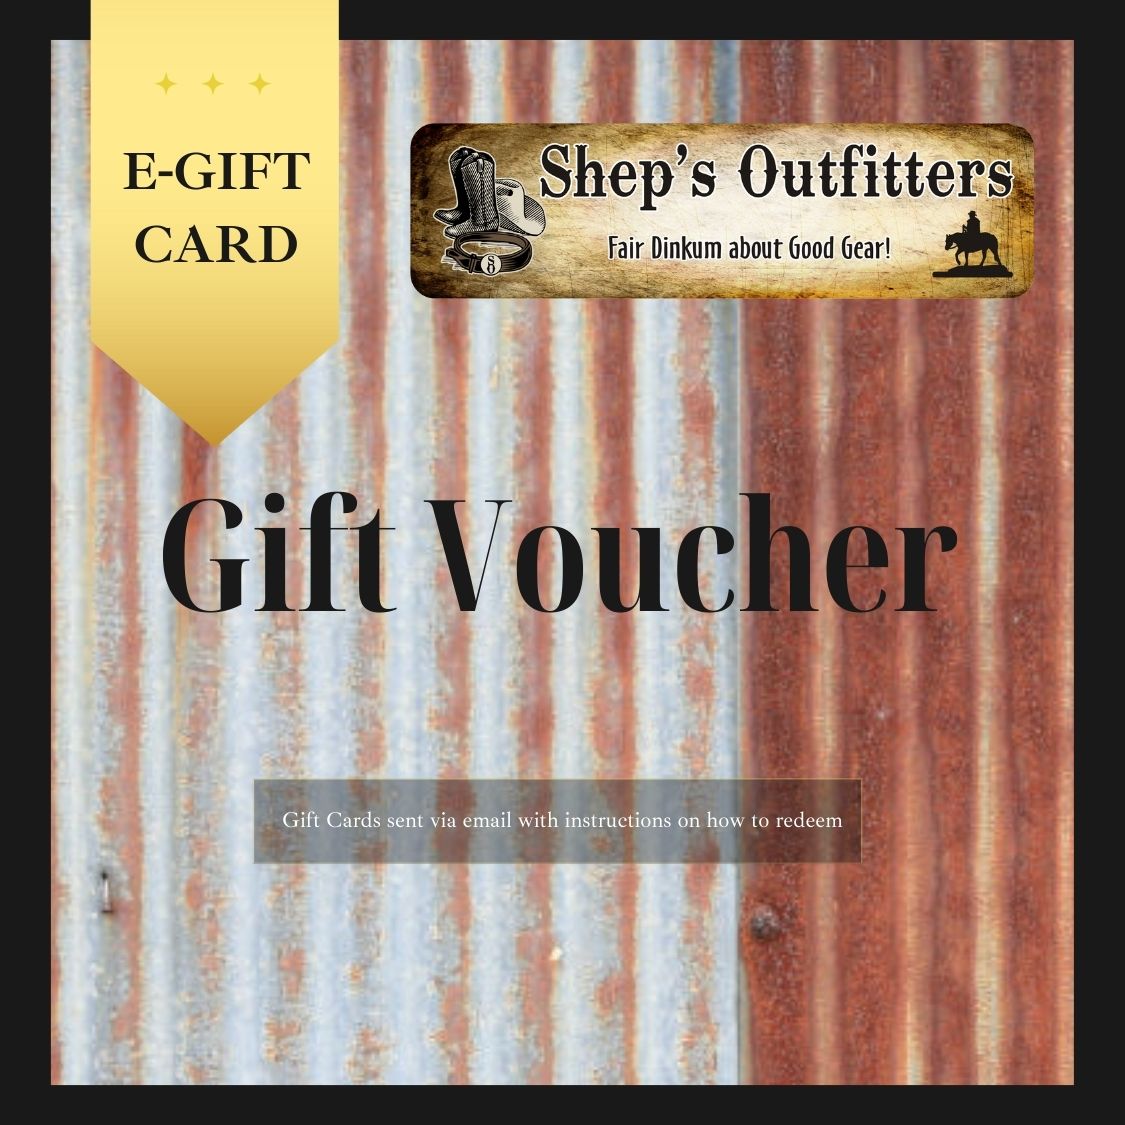 Sheps Outfitters Gift Voucher